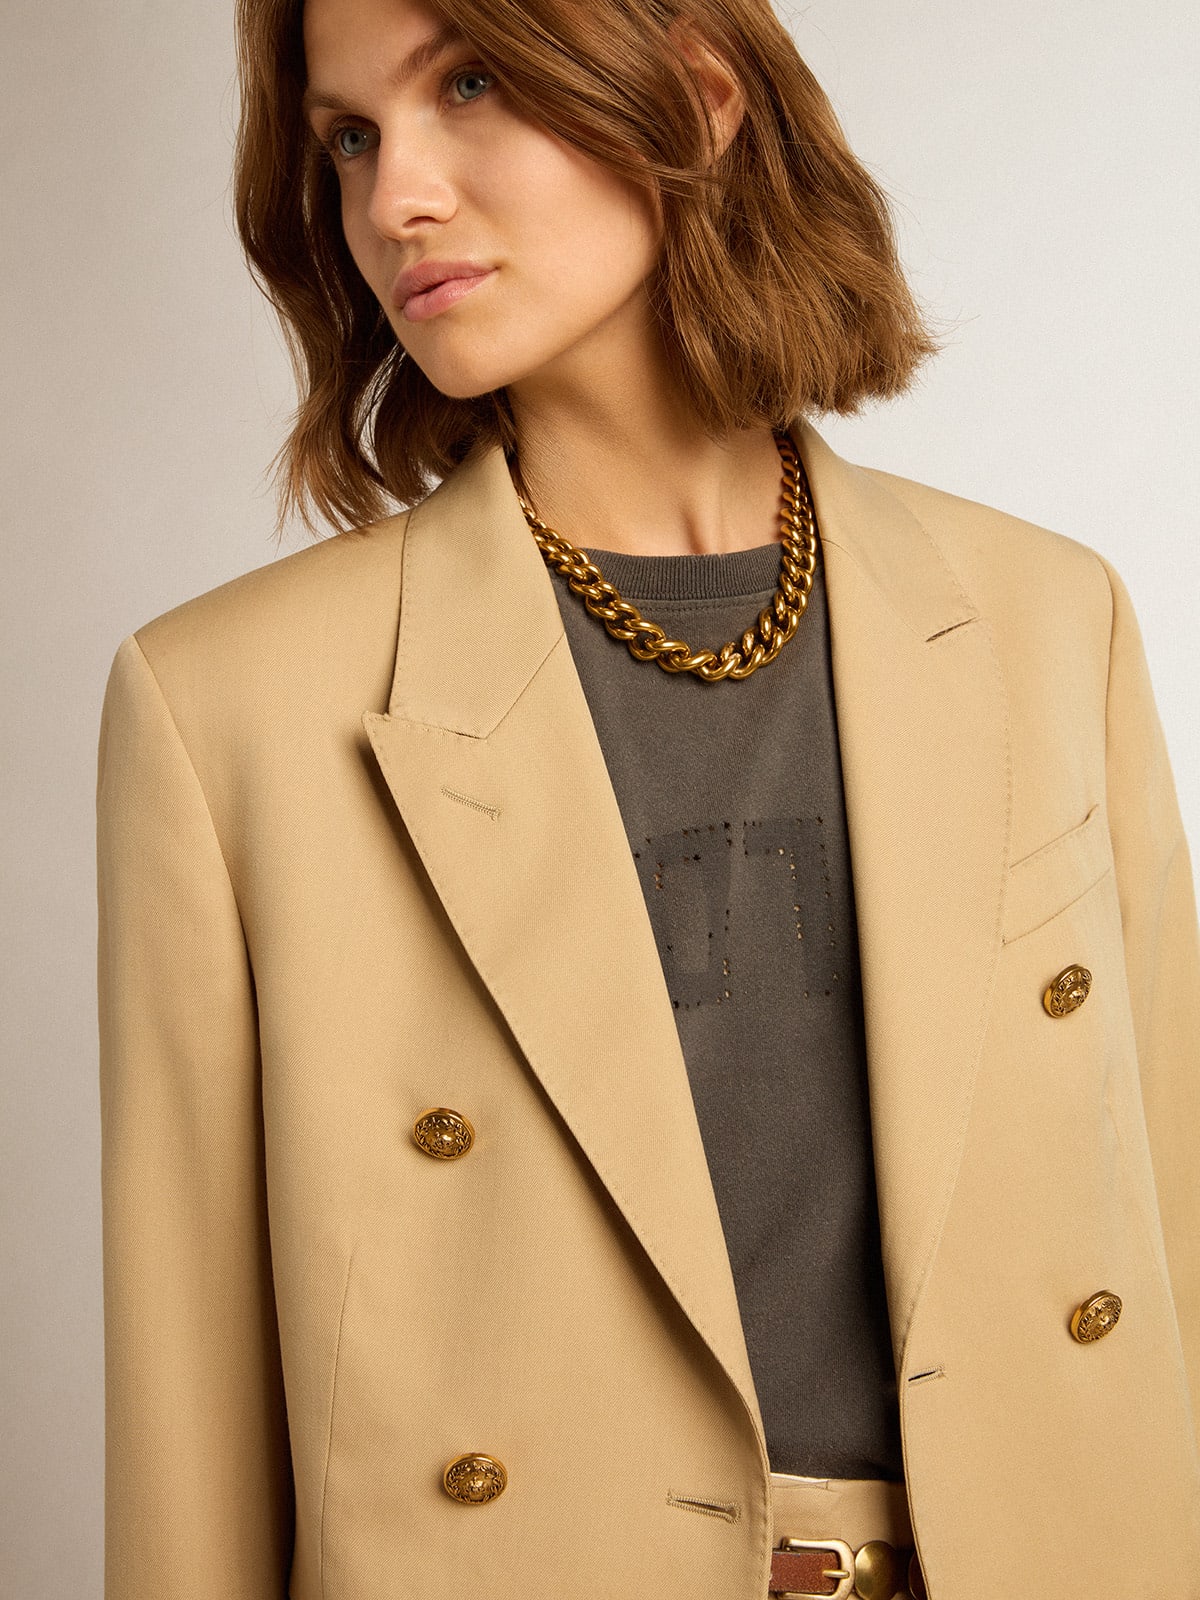 Golden Goose - Women’s double-breasted blazer in sand with gold heraldic buttons in 